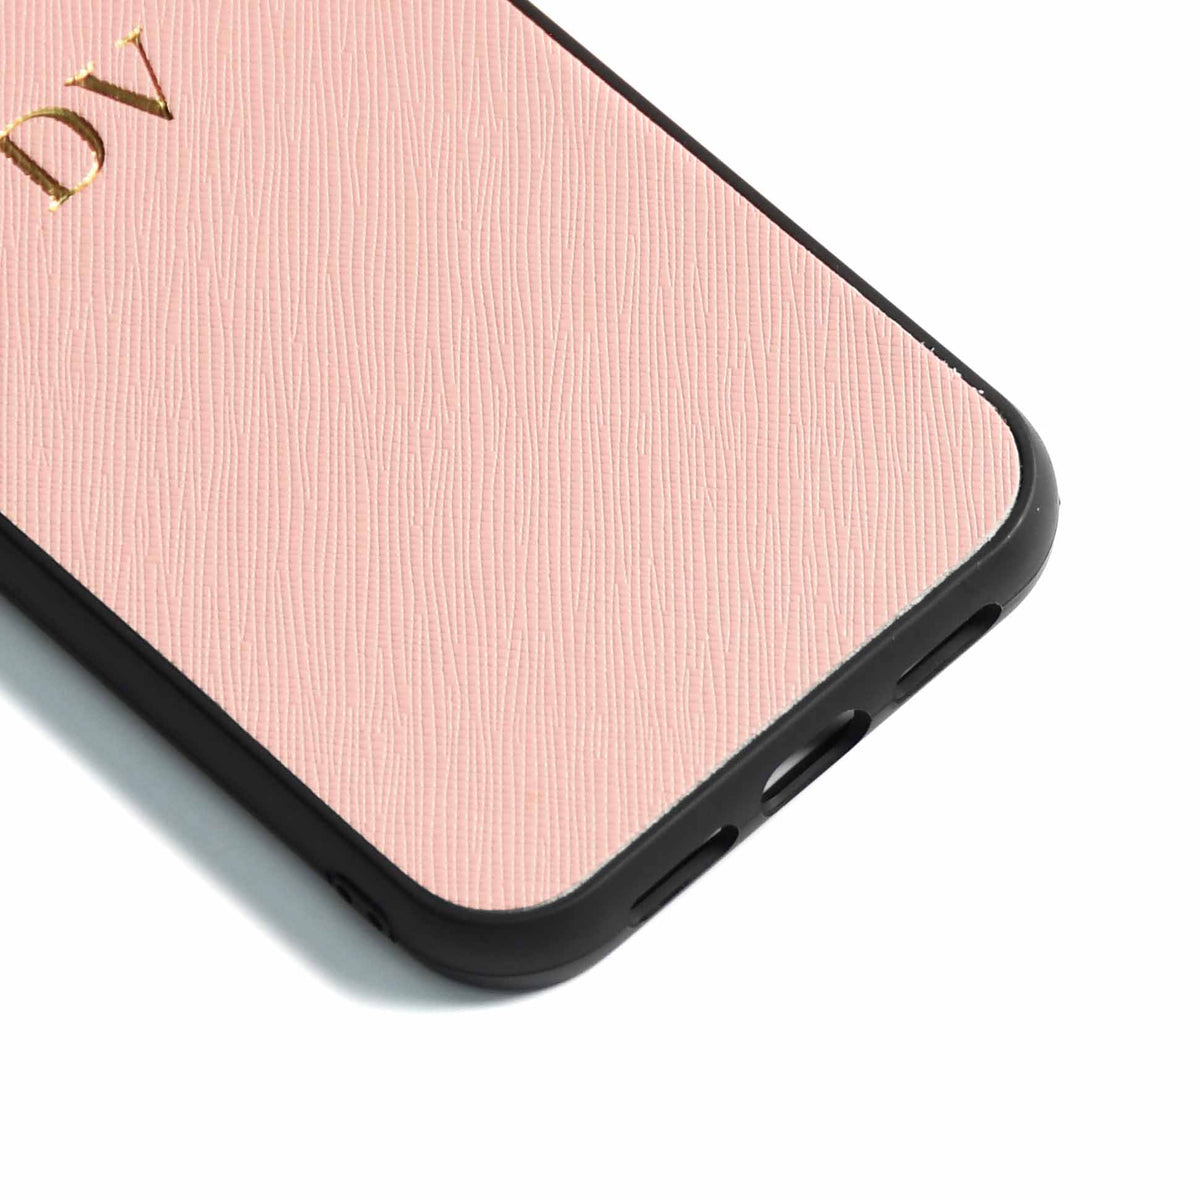 Samsung S9 Plus - Pink Molly - Personalizable